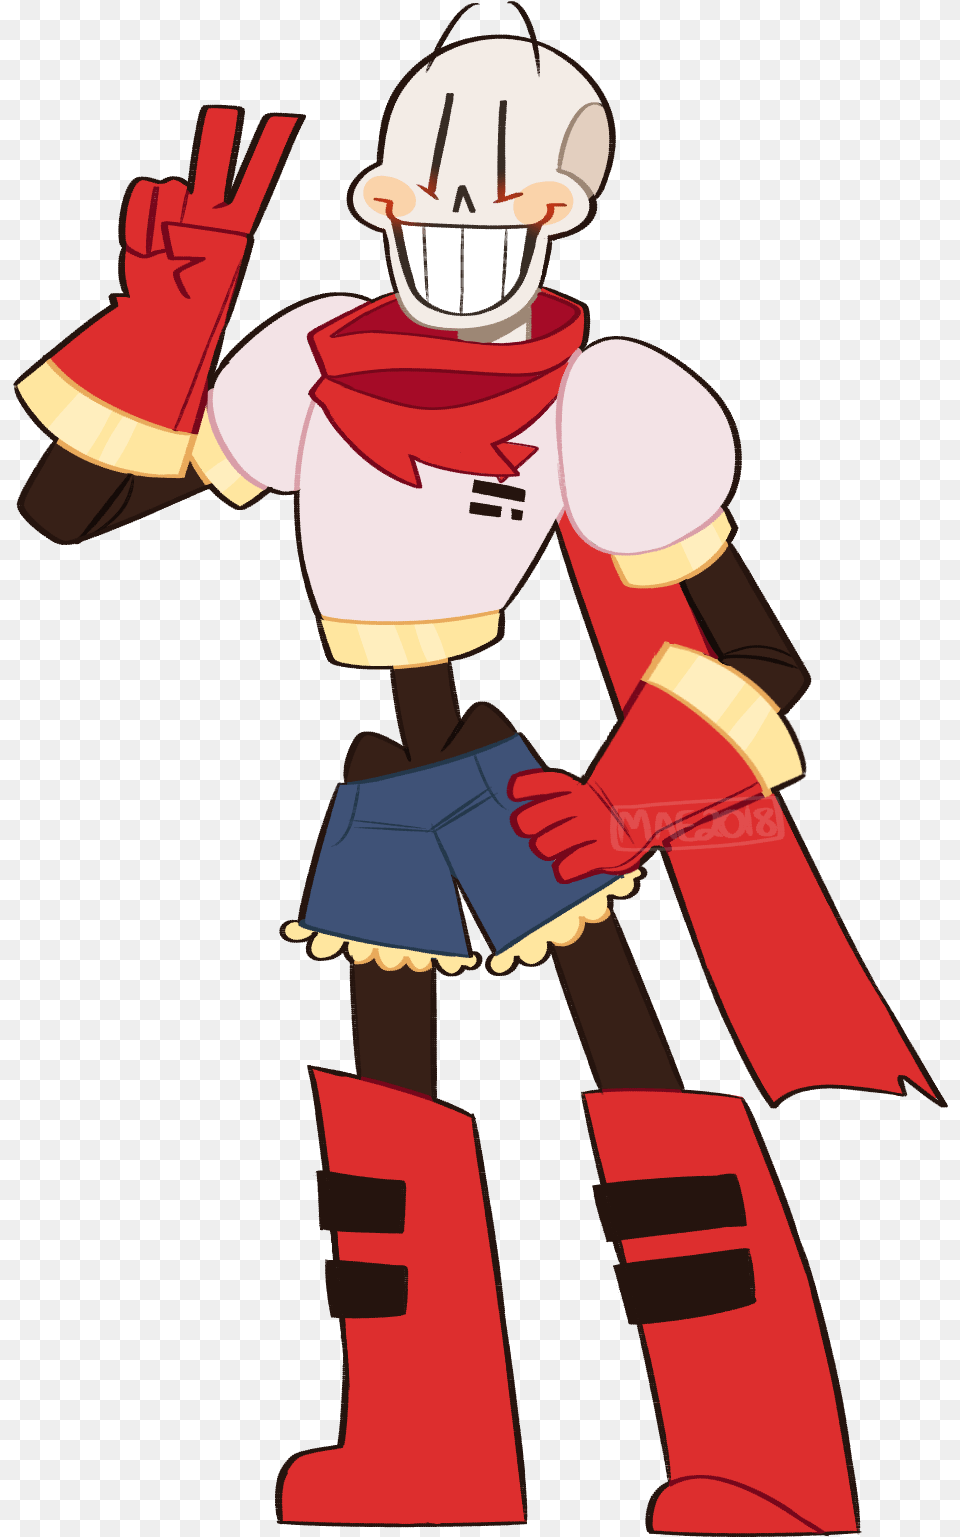 Undertale Undertale Papyrus Papyrus Papyrus Tag My Cartoon, Clothing, Glove, Baby, Book Free Png